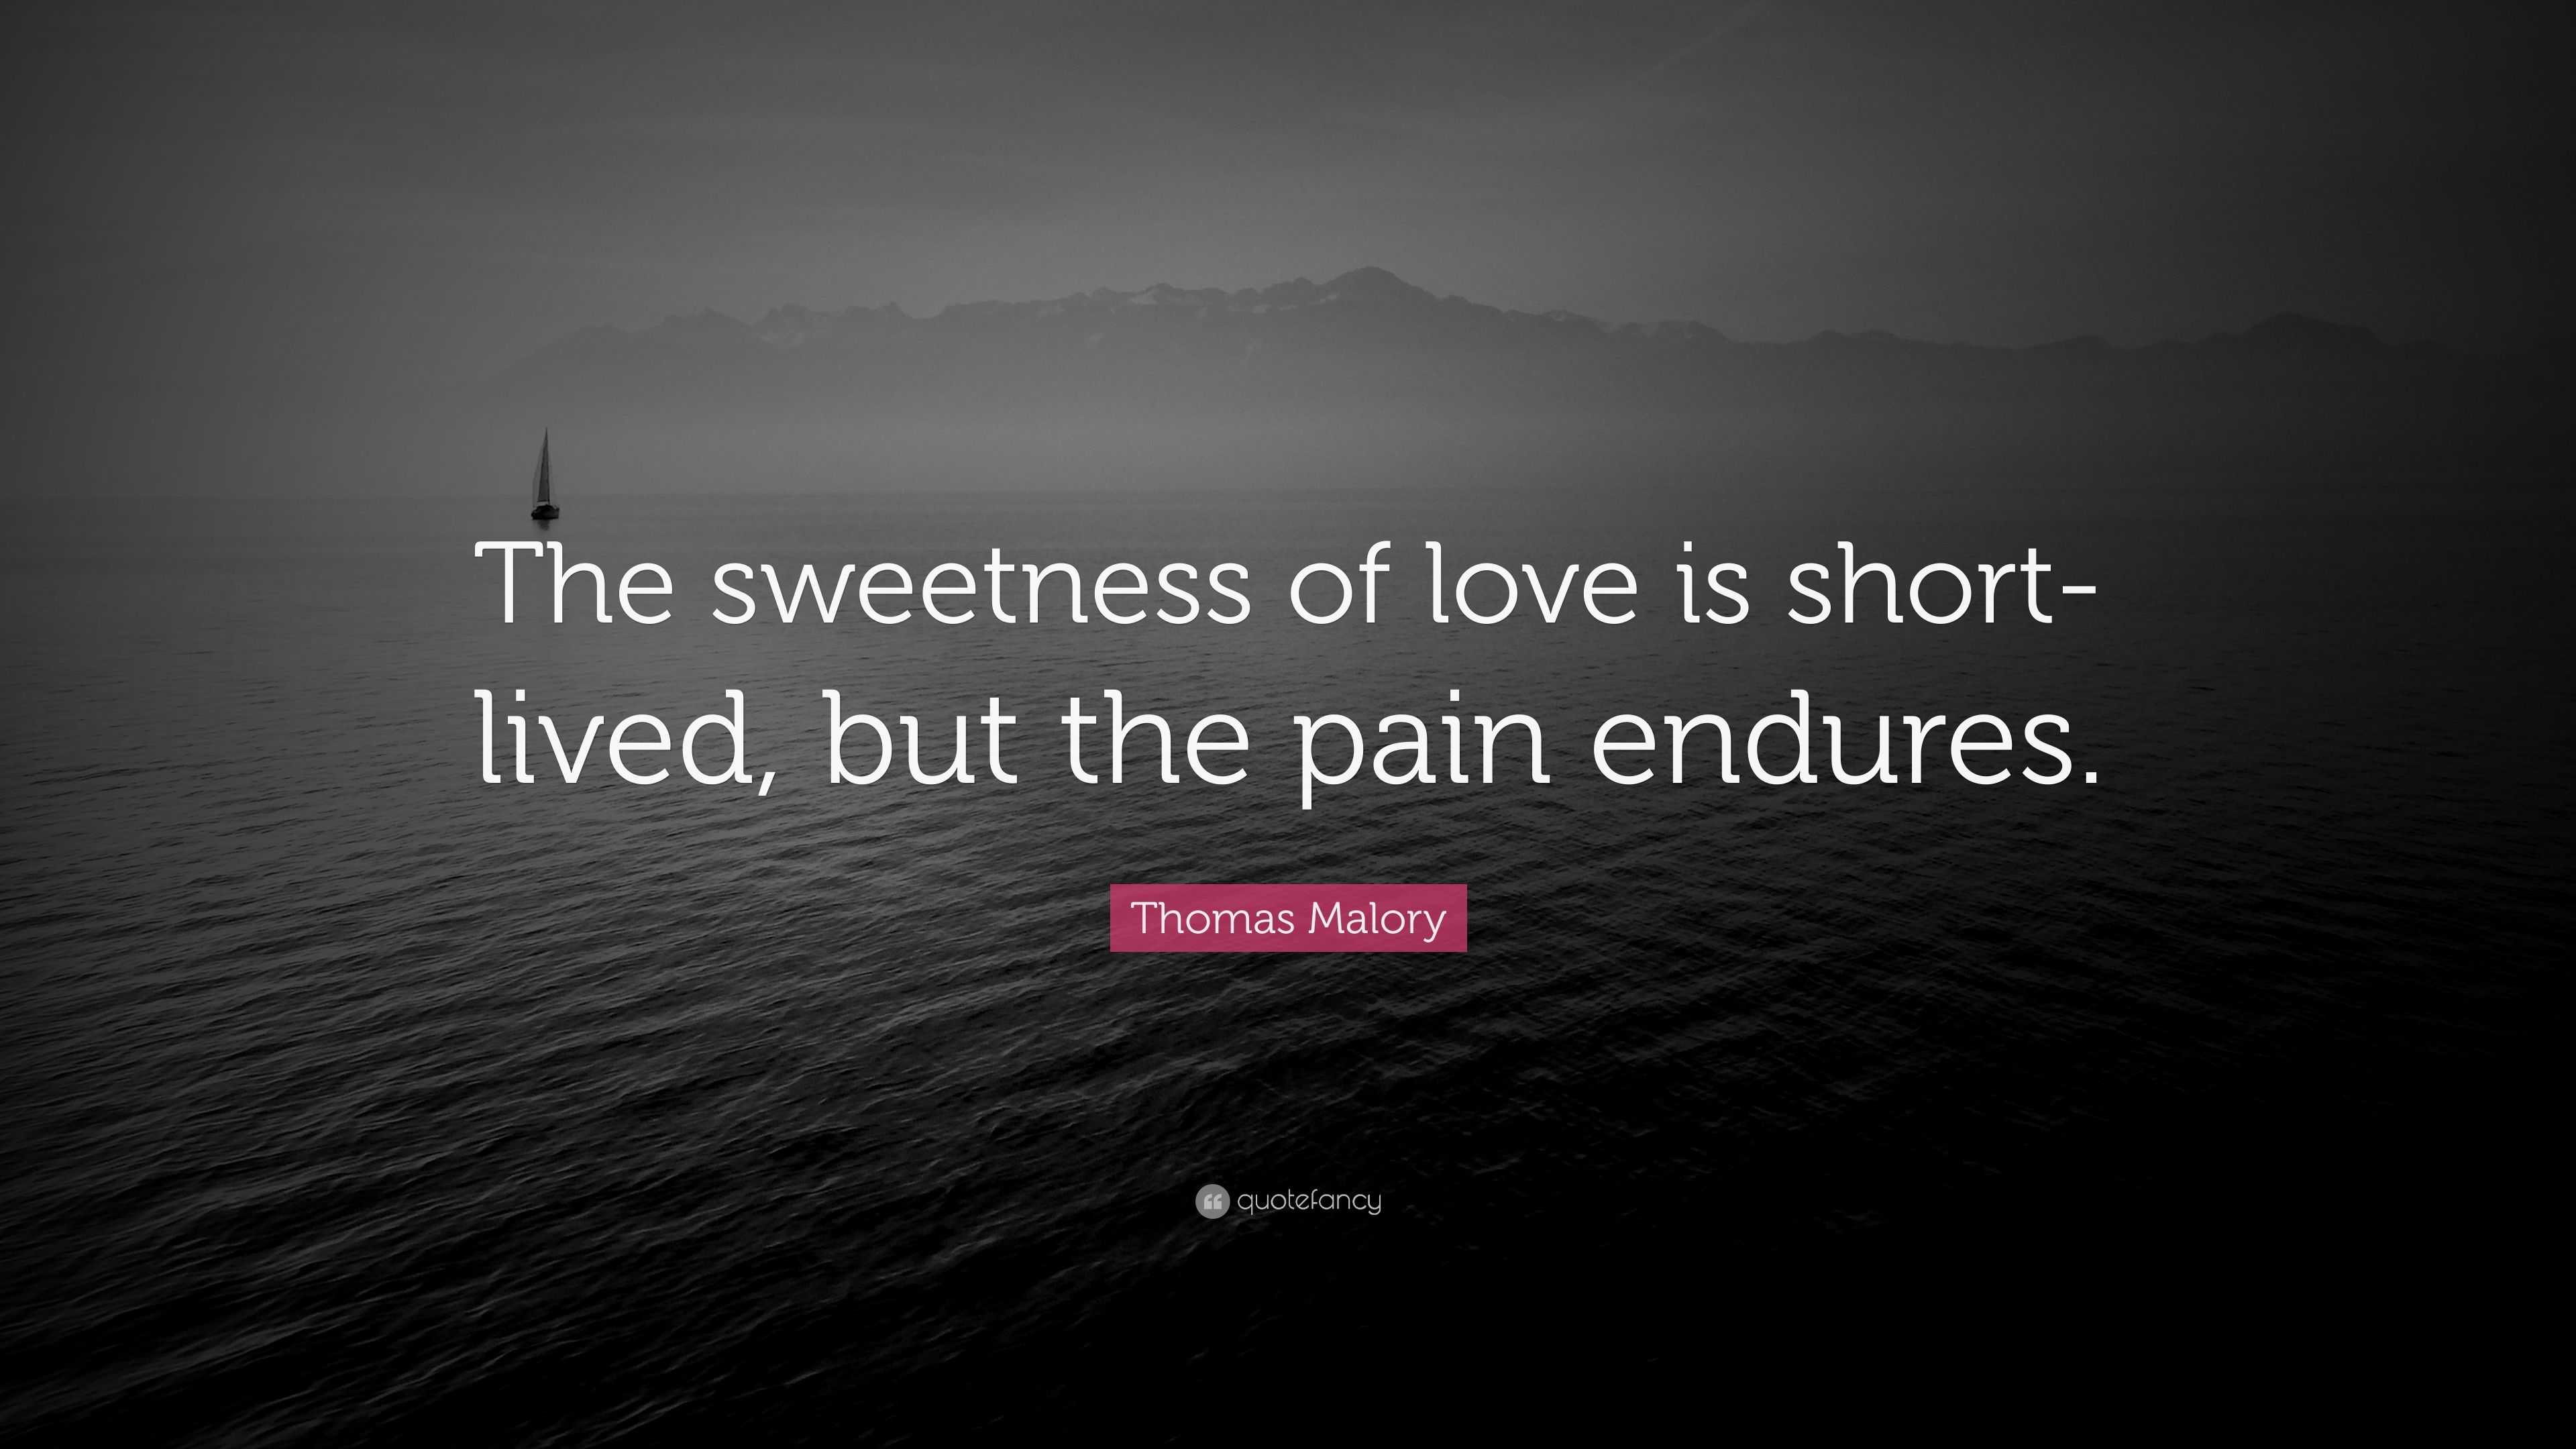 Thomas Malory Quote “The sweetness of love is short lived but the